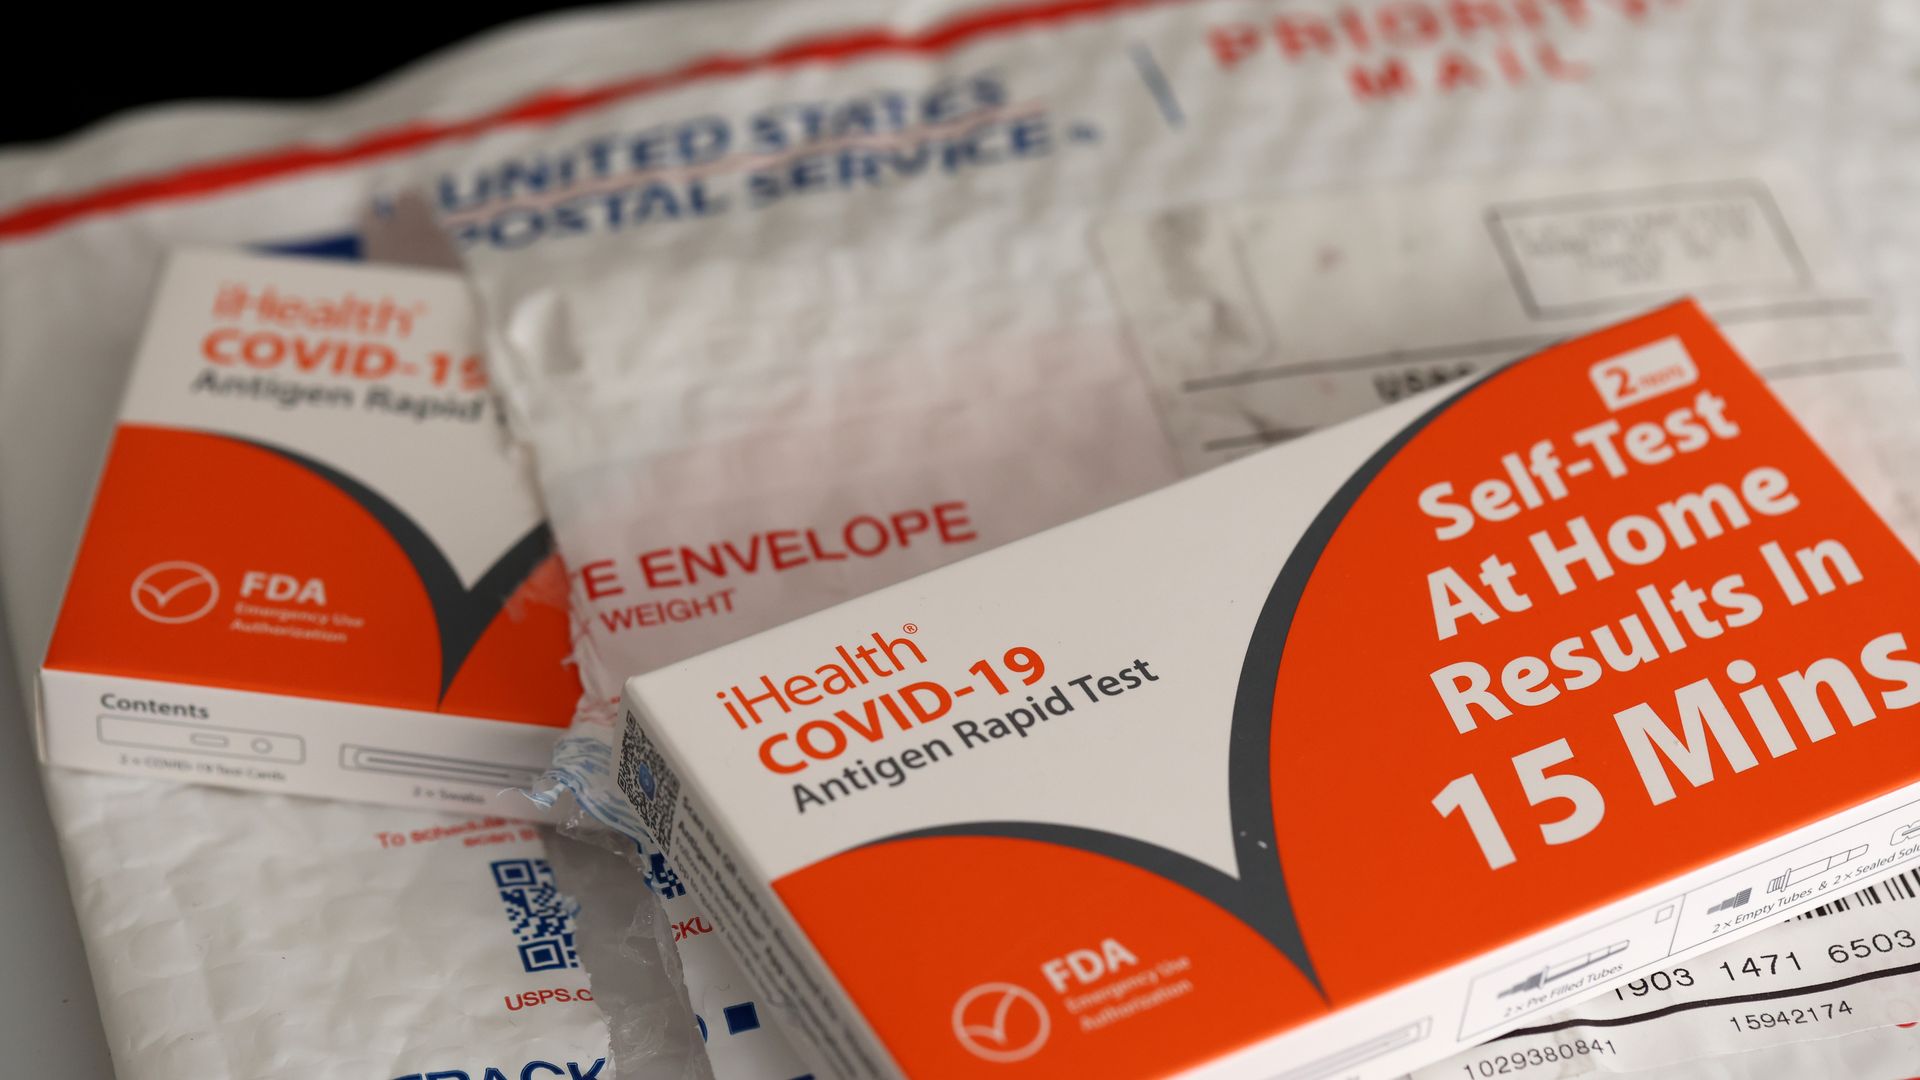 COVID test kits with United States Postal Service padded envelope